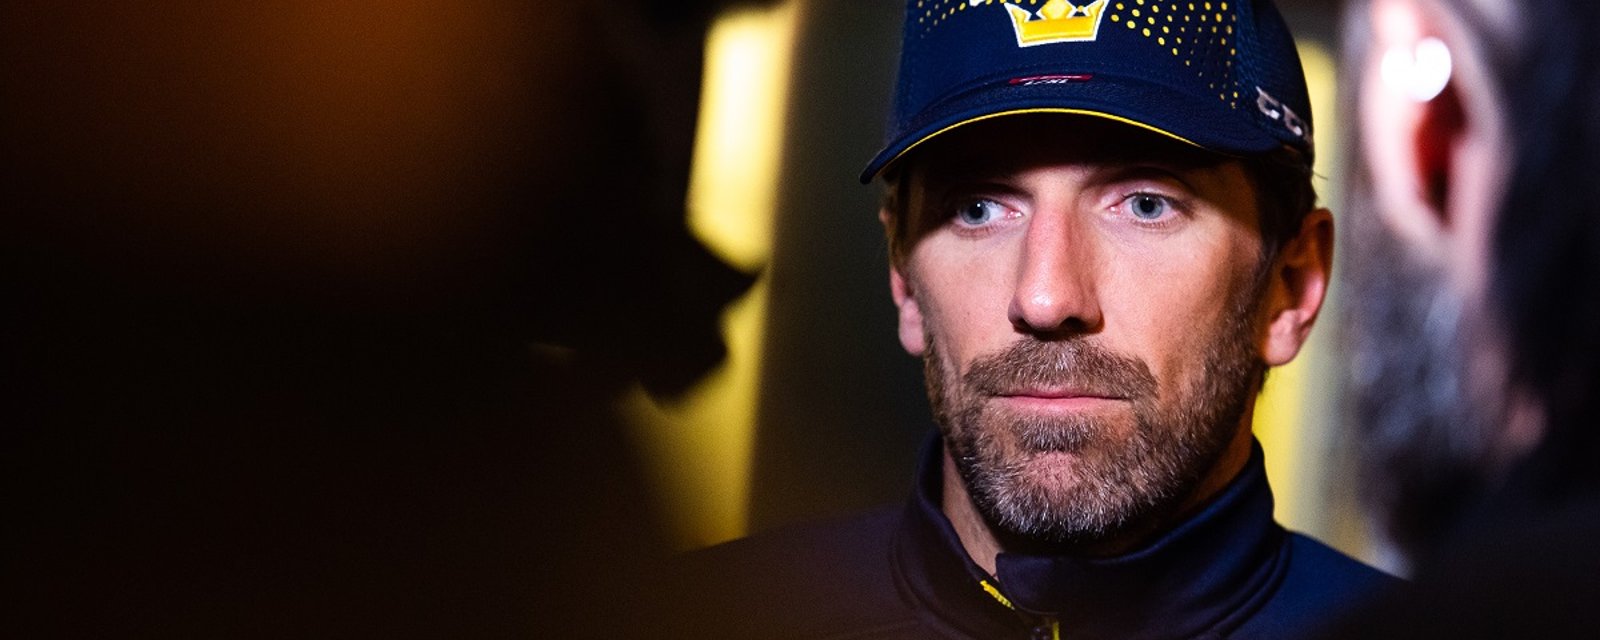 Henrik Lundqvist makes heartbreaking comments to the Swedish media.